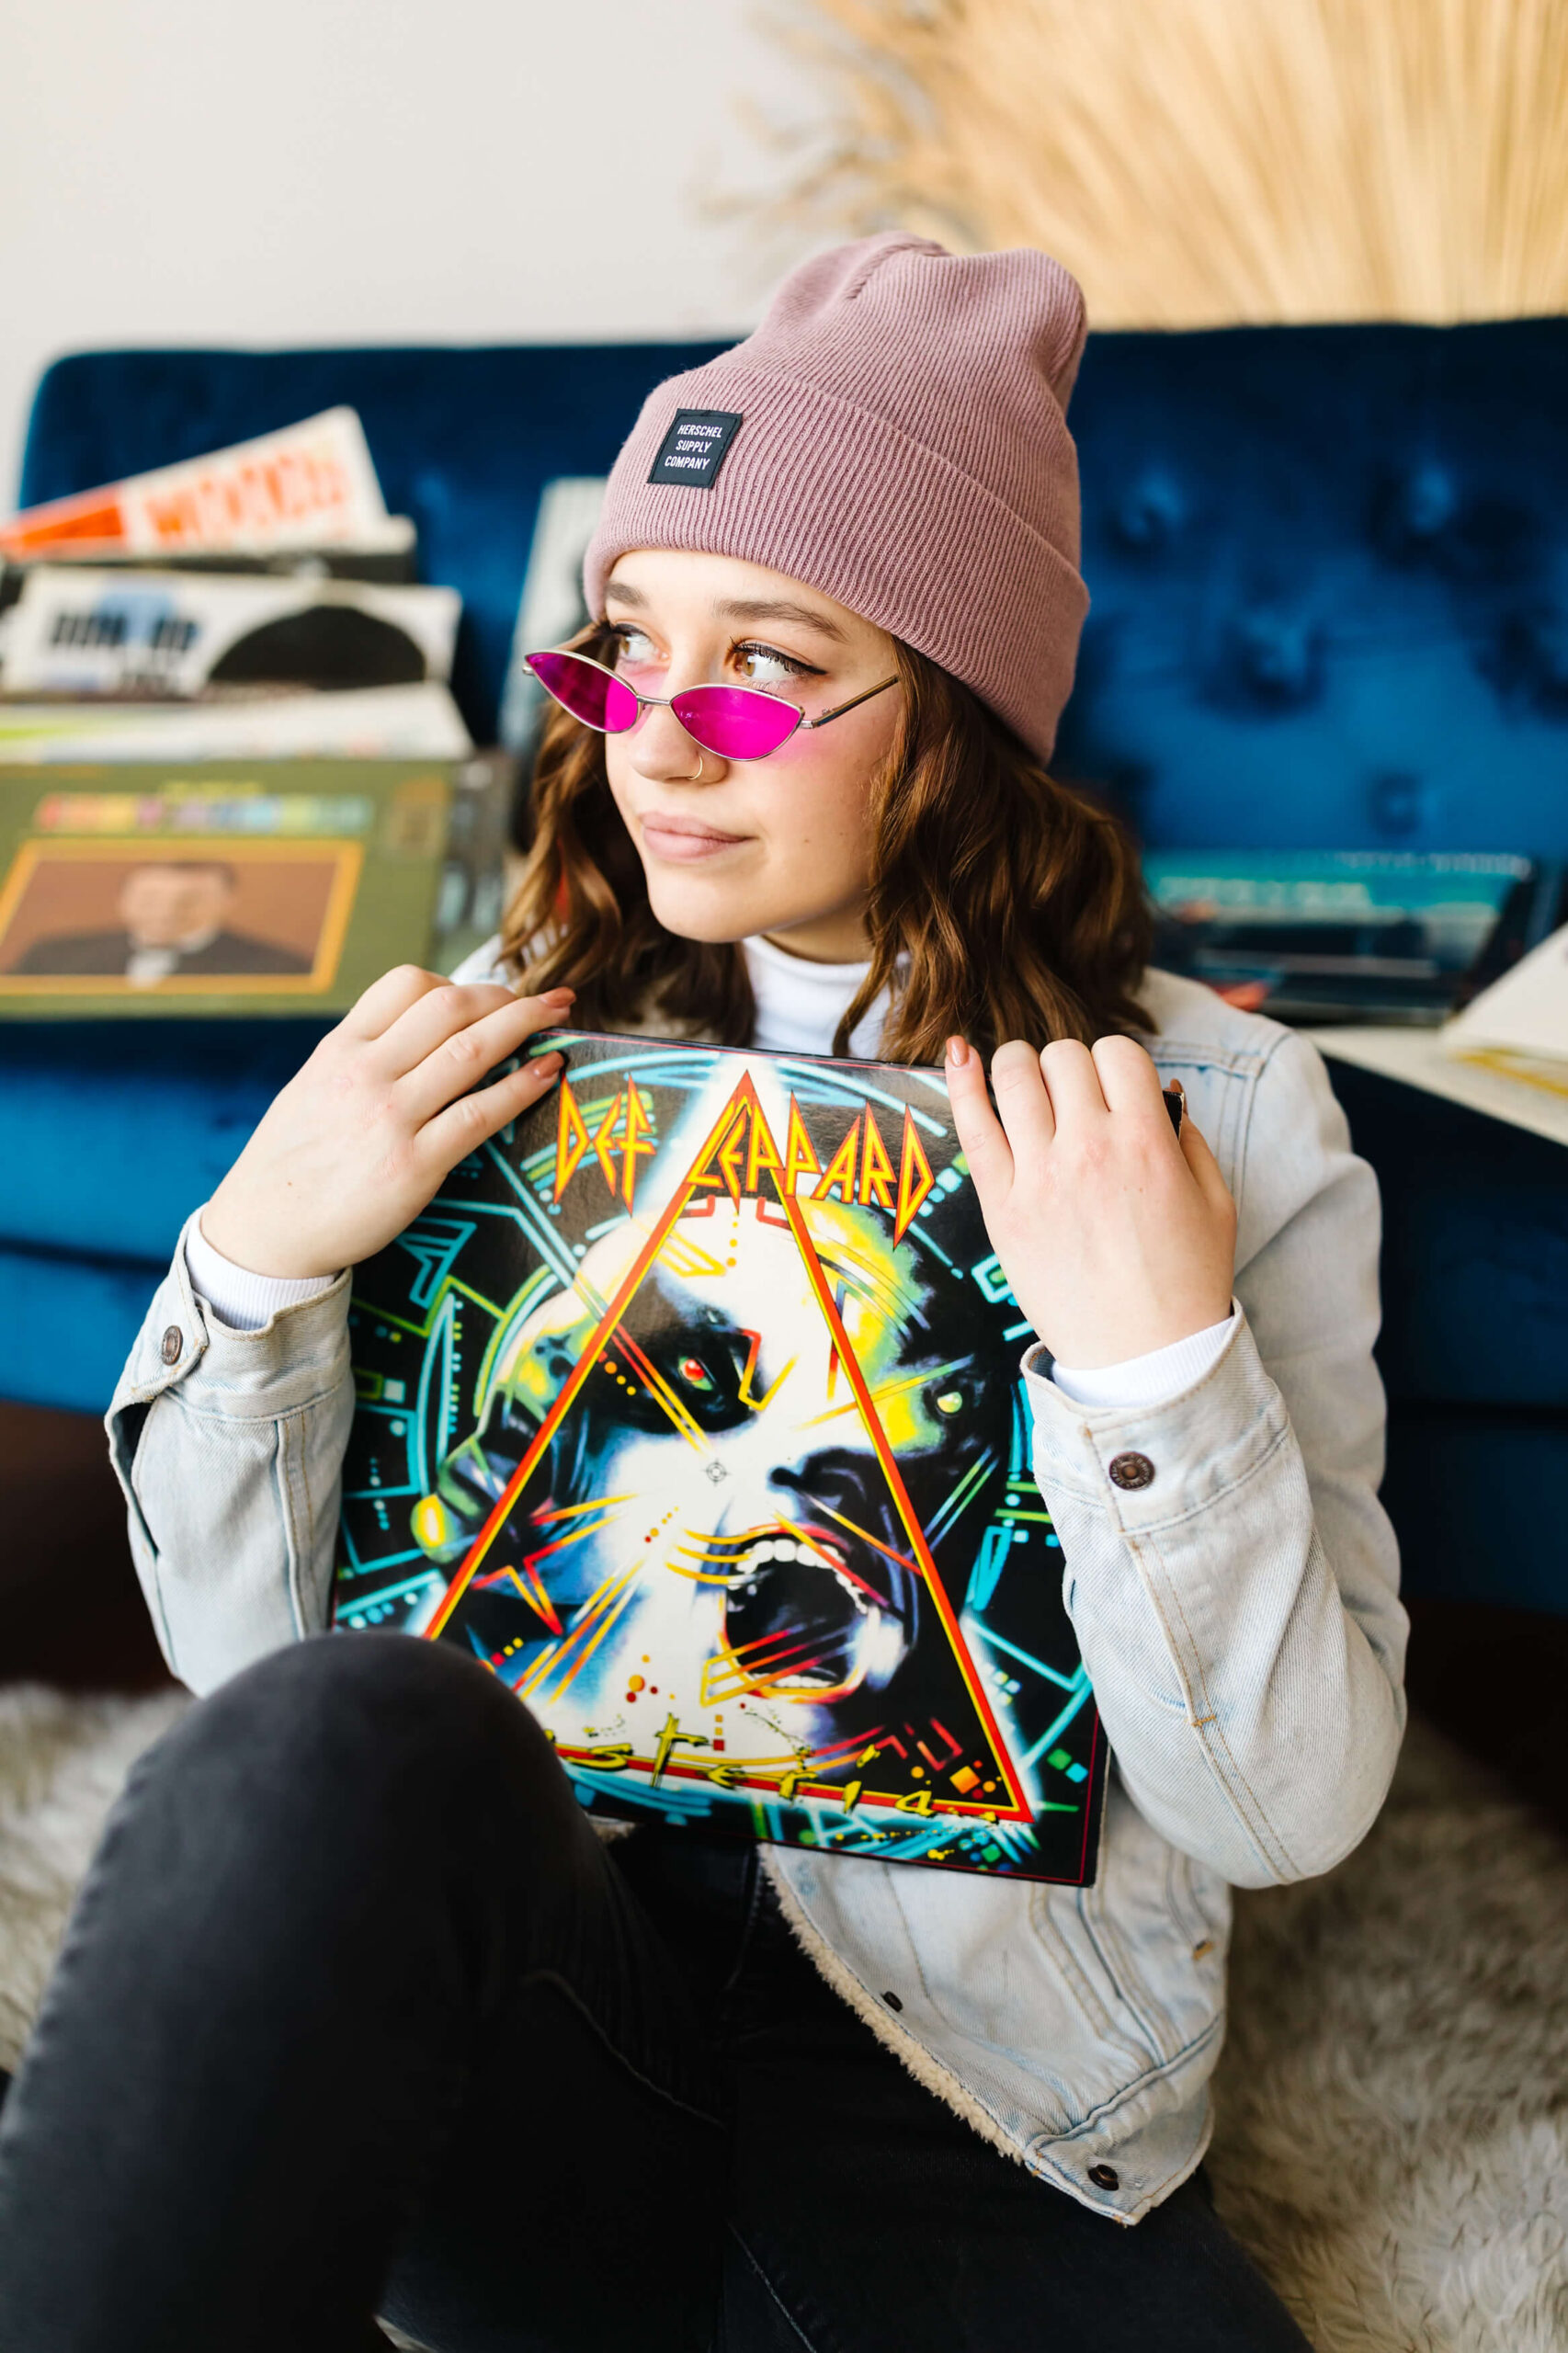 girl wearing pink beanie and blue jean jacket, leaning back on blue velvet couch next to record player and holding Def Leopard vinyl record with albums scattered around, during senior studio photoshoot